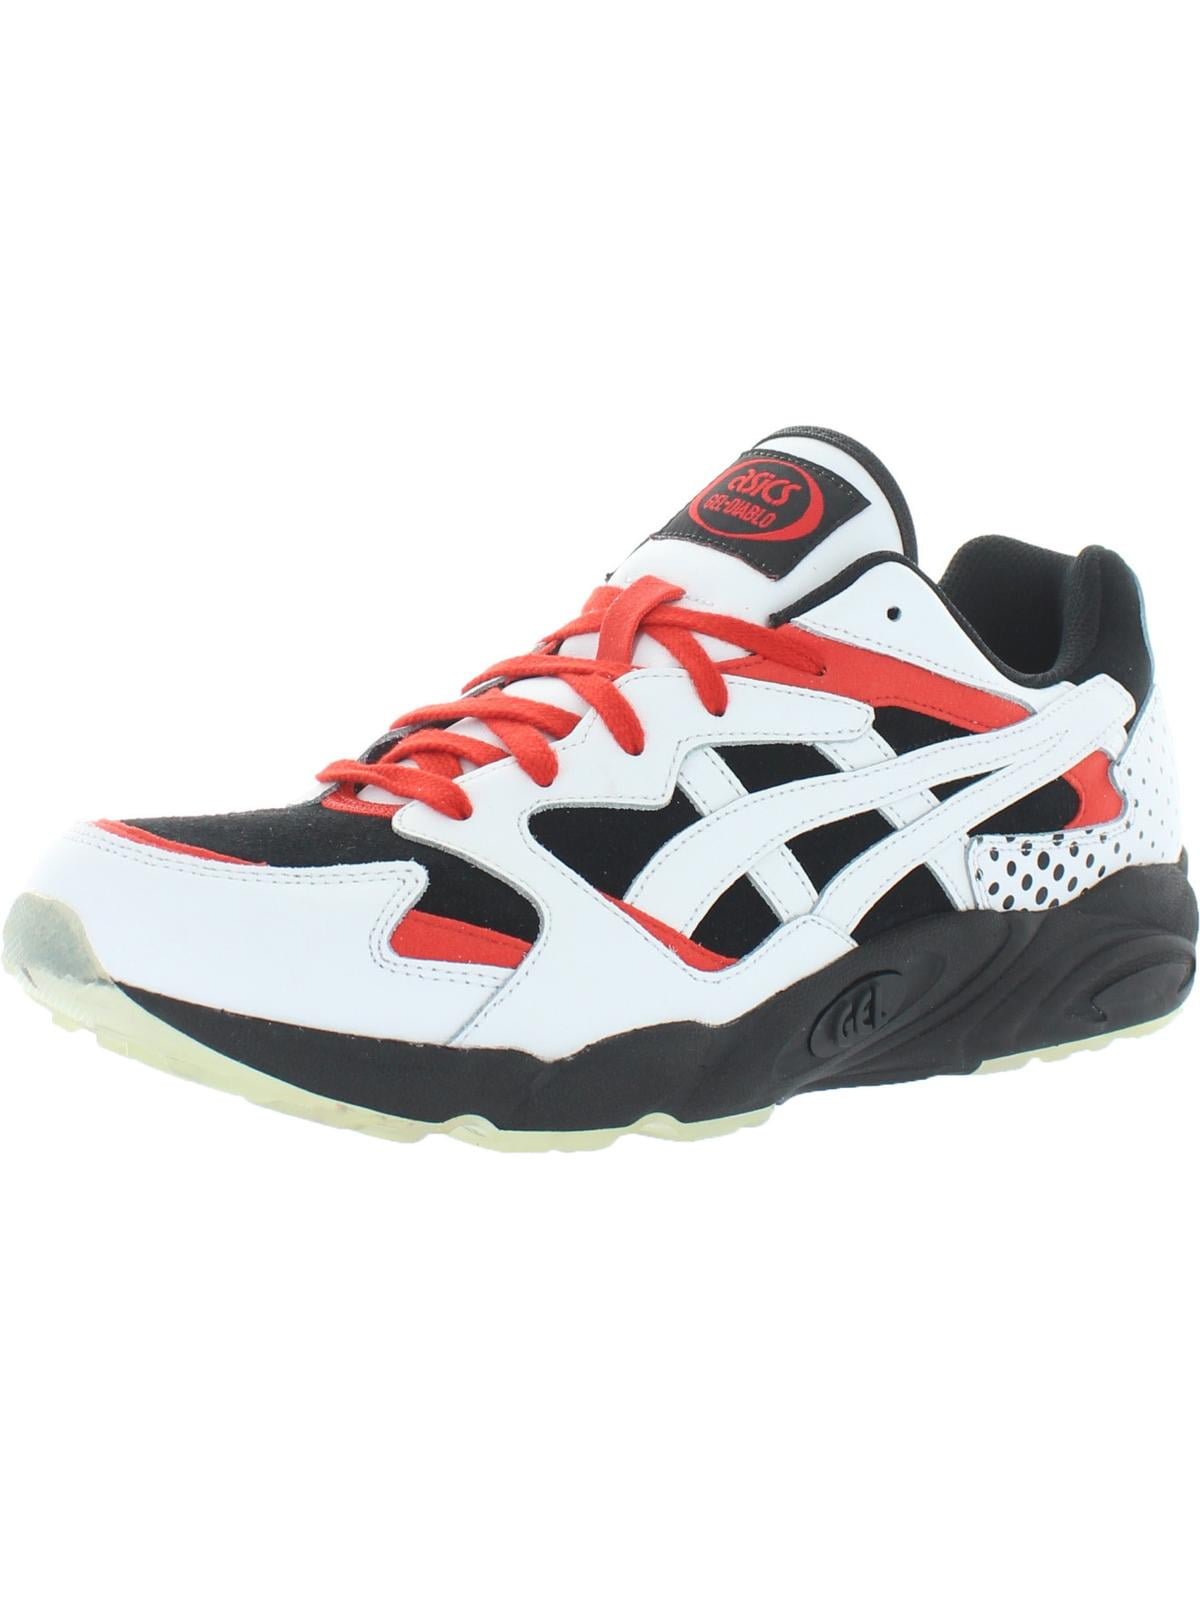 asics leather shoes mens